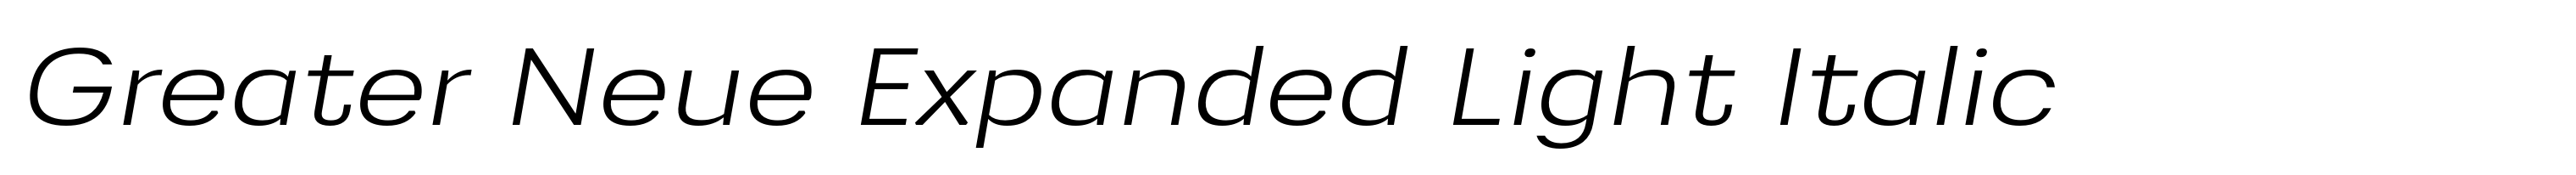 Greater Neue Expanded Light Italic